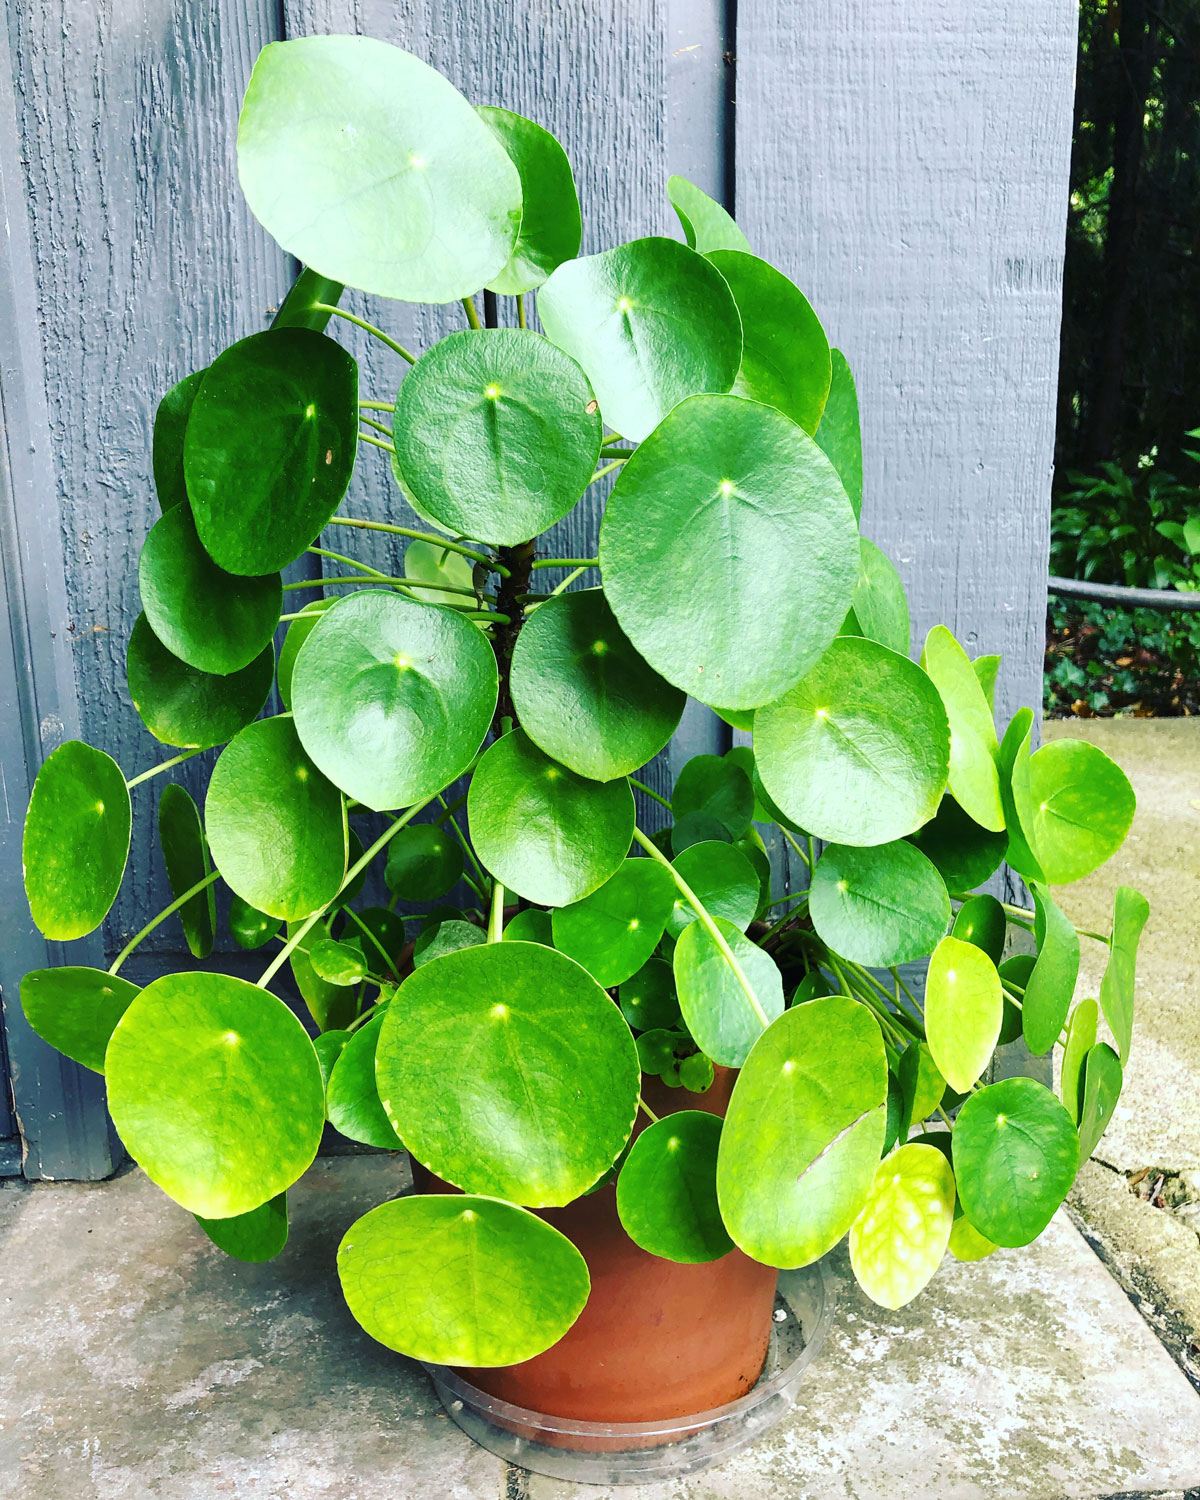 Chinese Money Plant Care - 5 Secrets (Pilea Peperomioides)